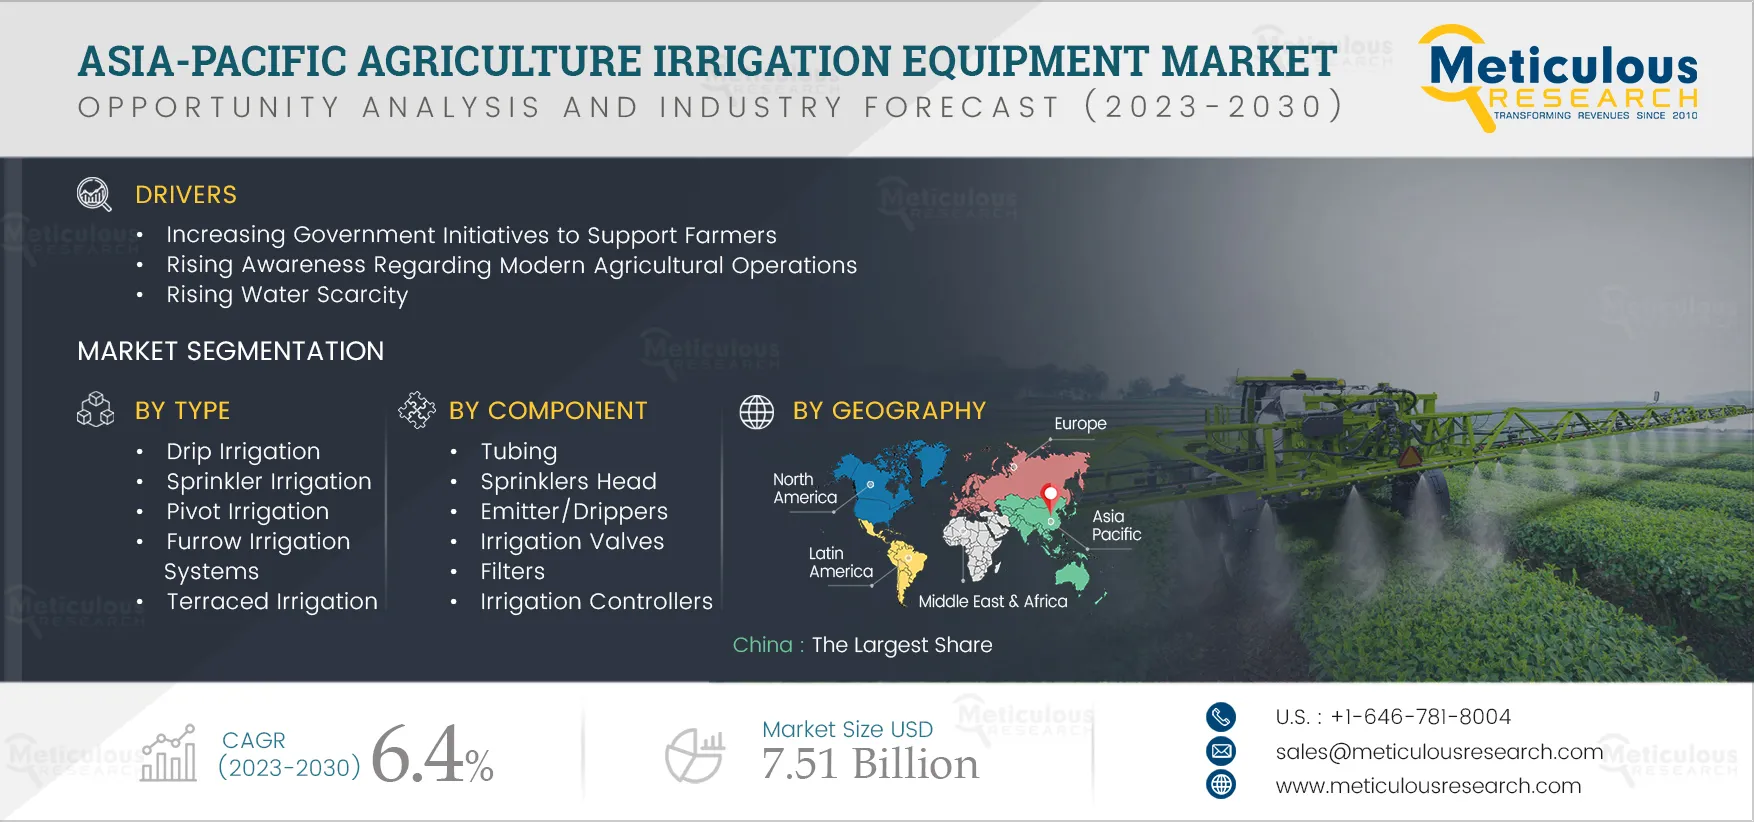 Asia-Pacific Agriculture Irrigation Equipment Market